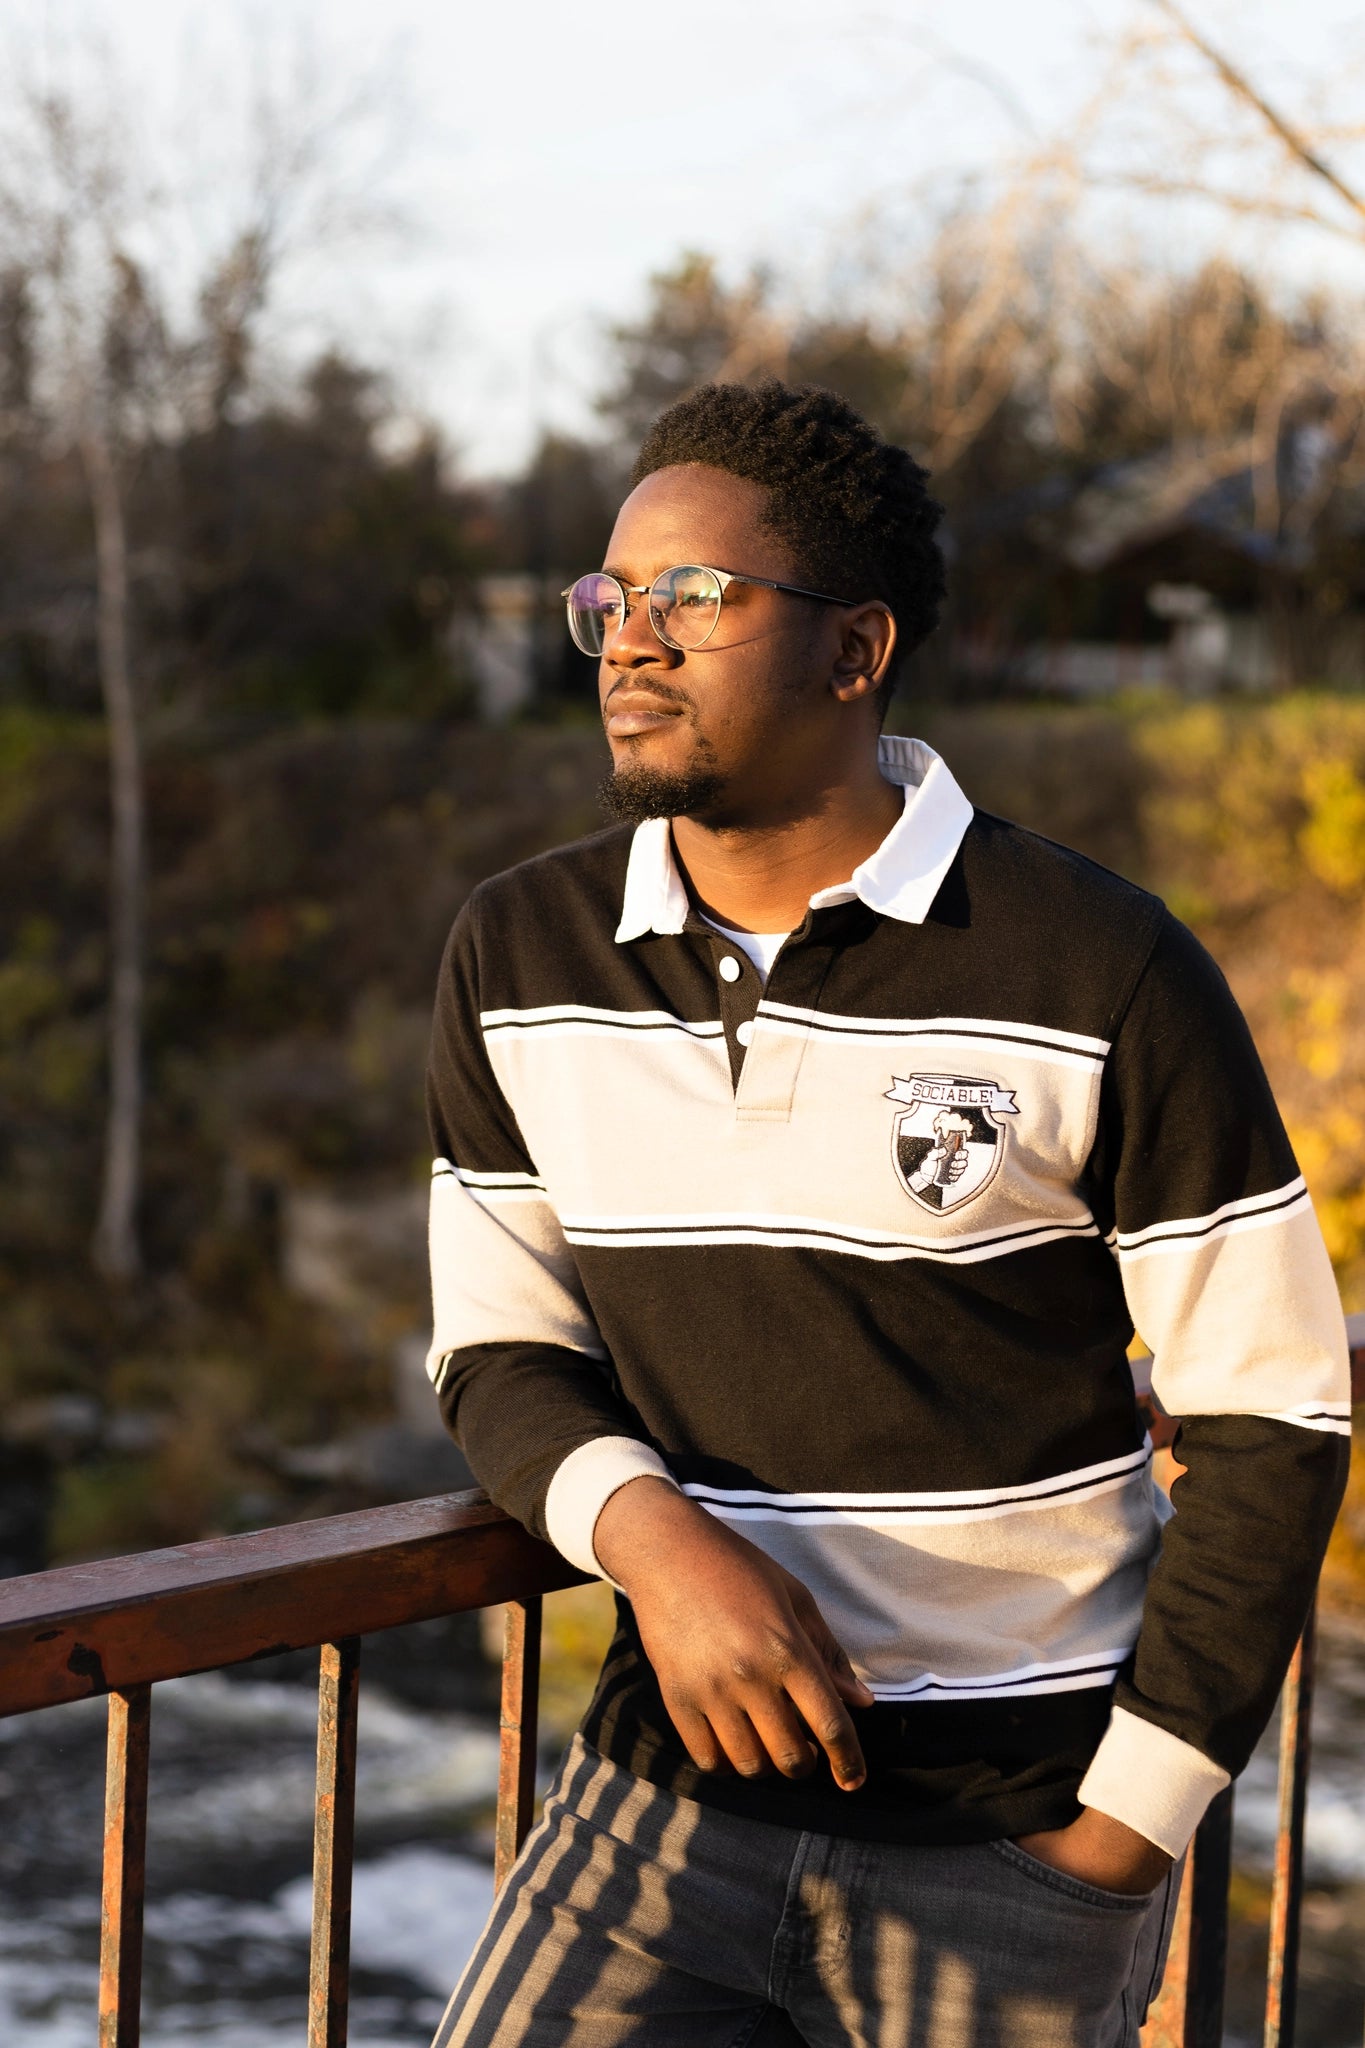 A black man wearing glasses on a bridge wearing a black and grey sociable rugby shirt